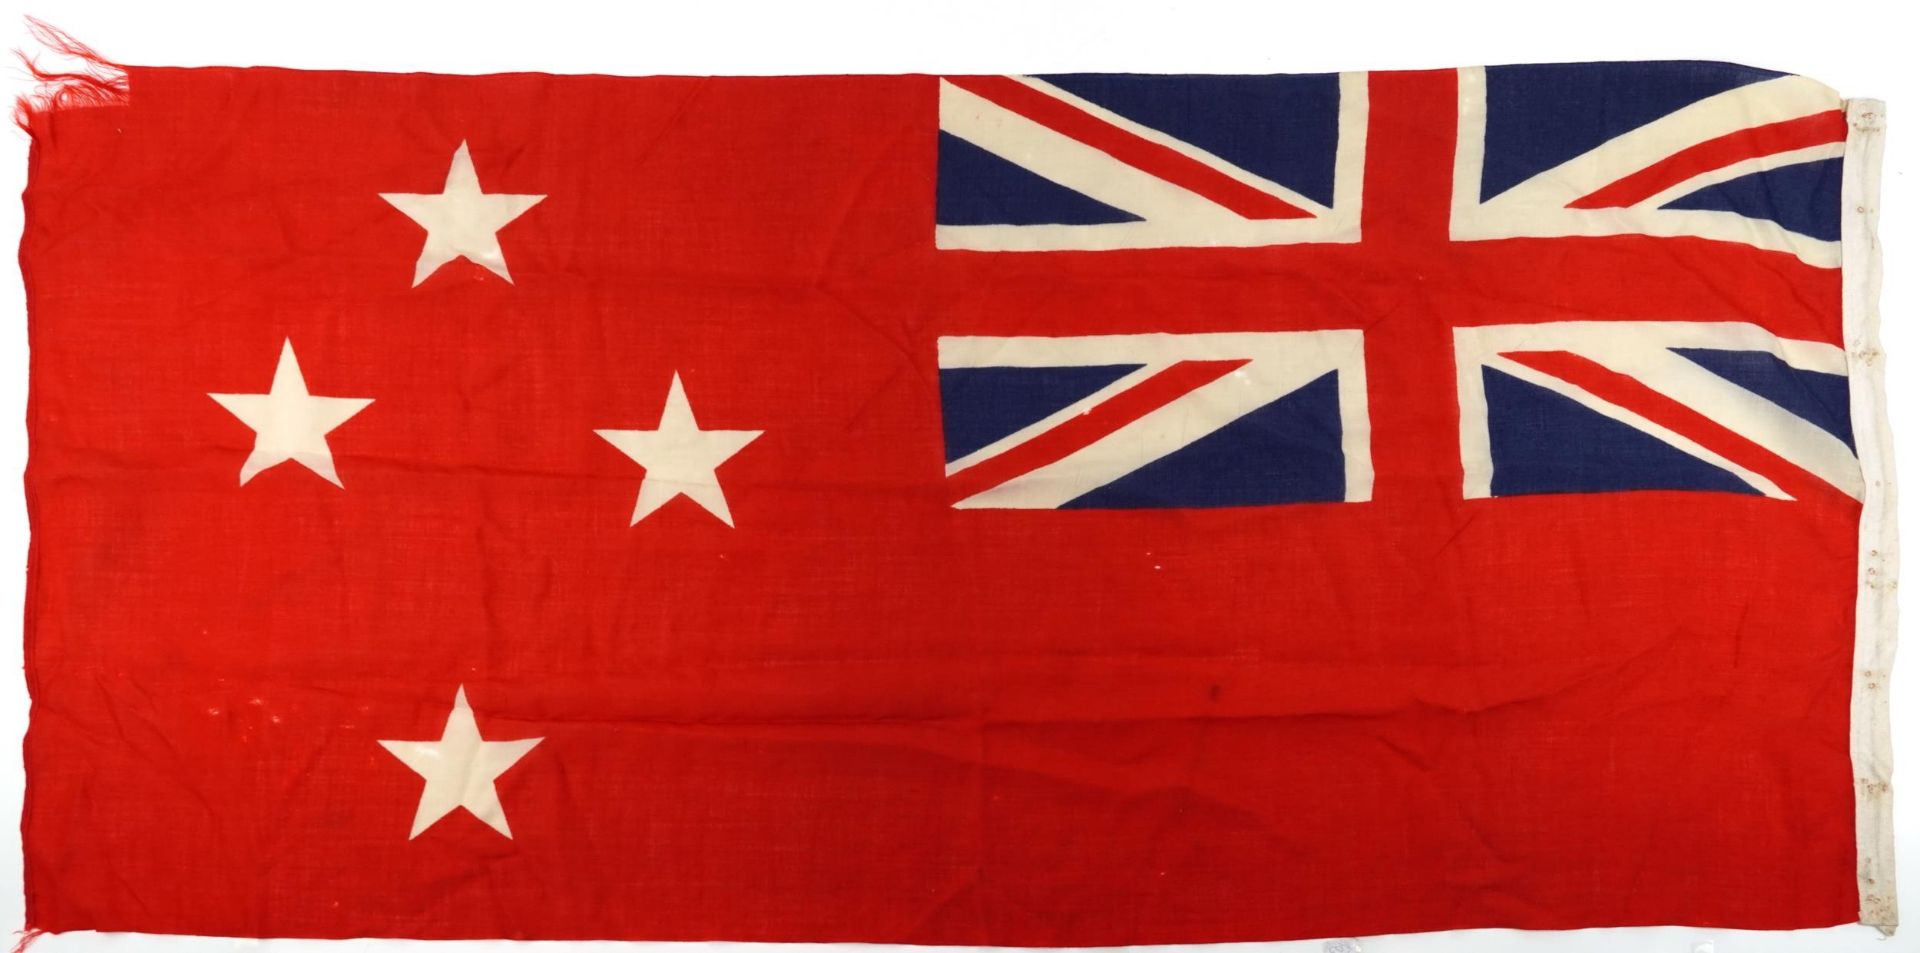 Large military interest Civil New Zealand flag with stars, 180cm x 86cm - Image 2 of 2